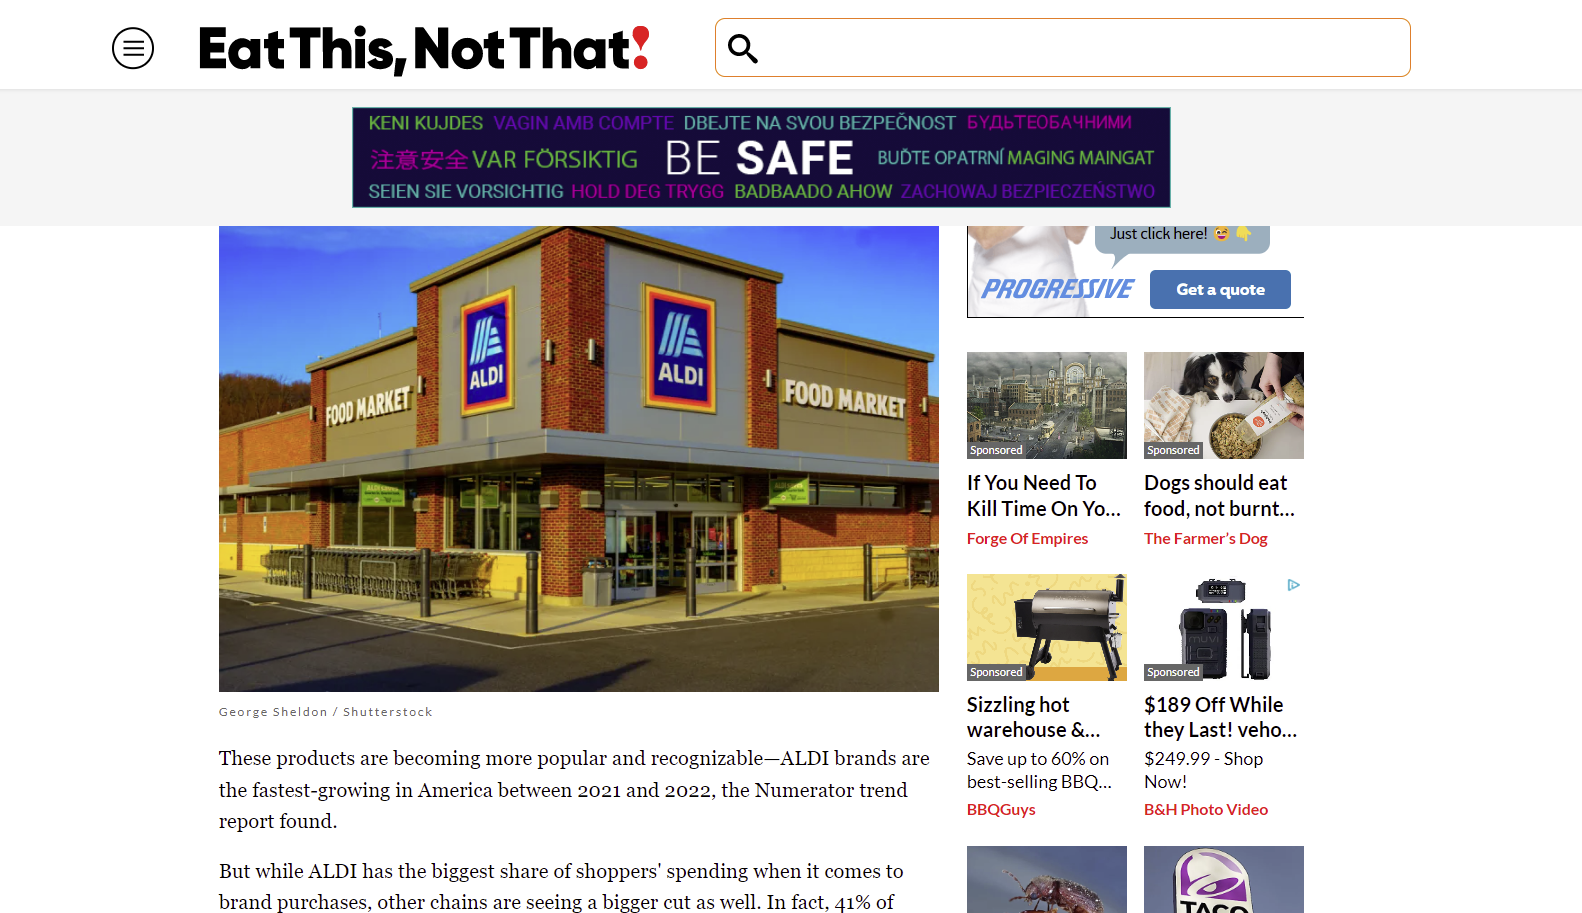 Eat This, Not That Publishes George Sheldon Photo of Aldi